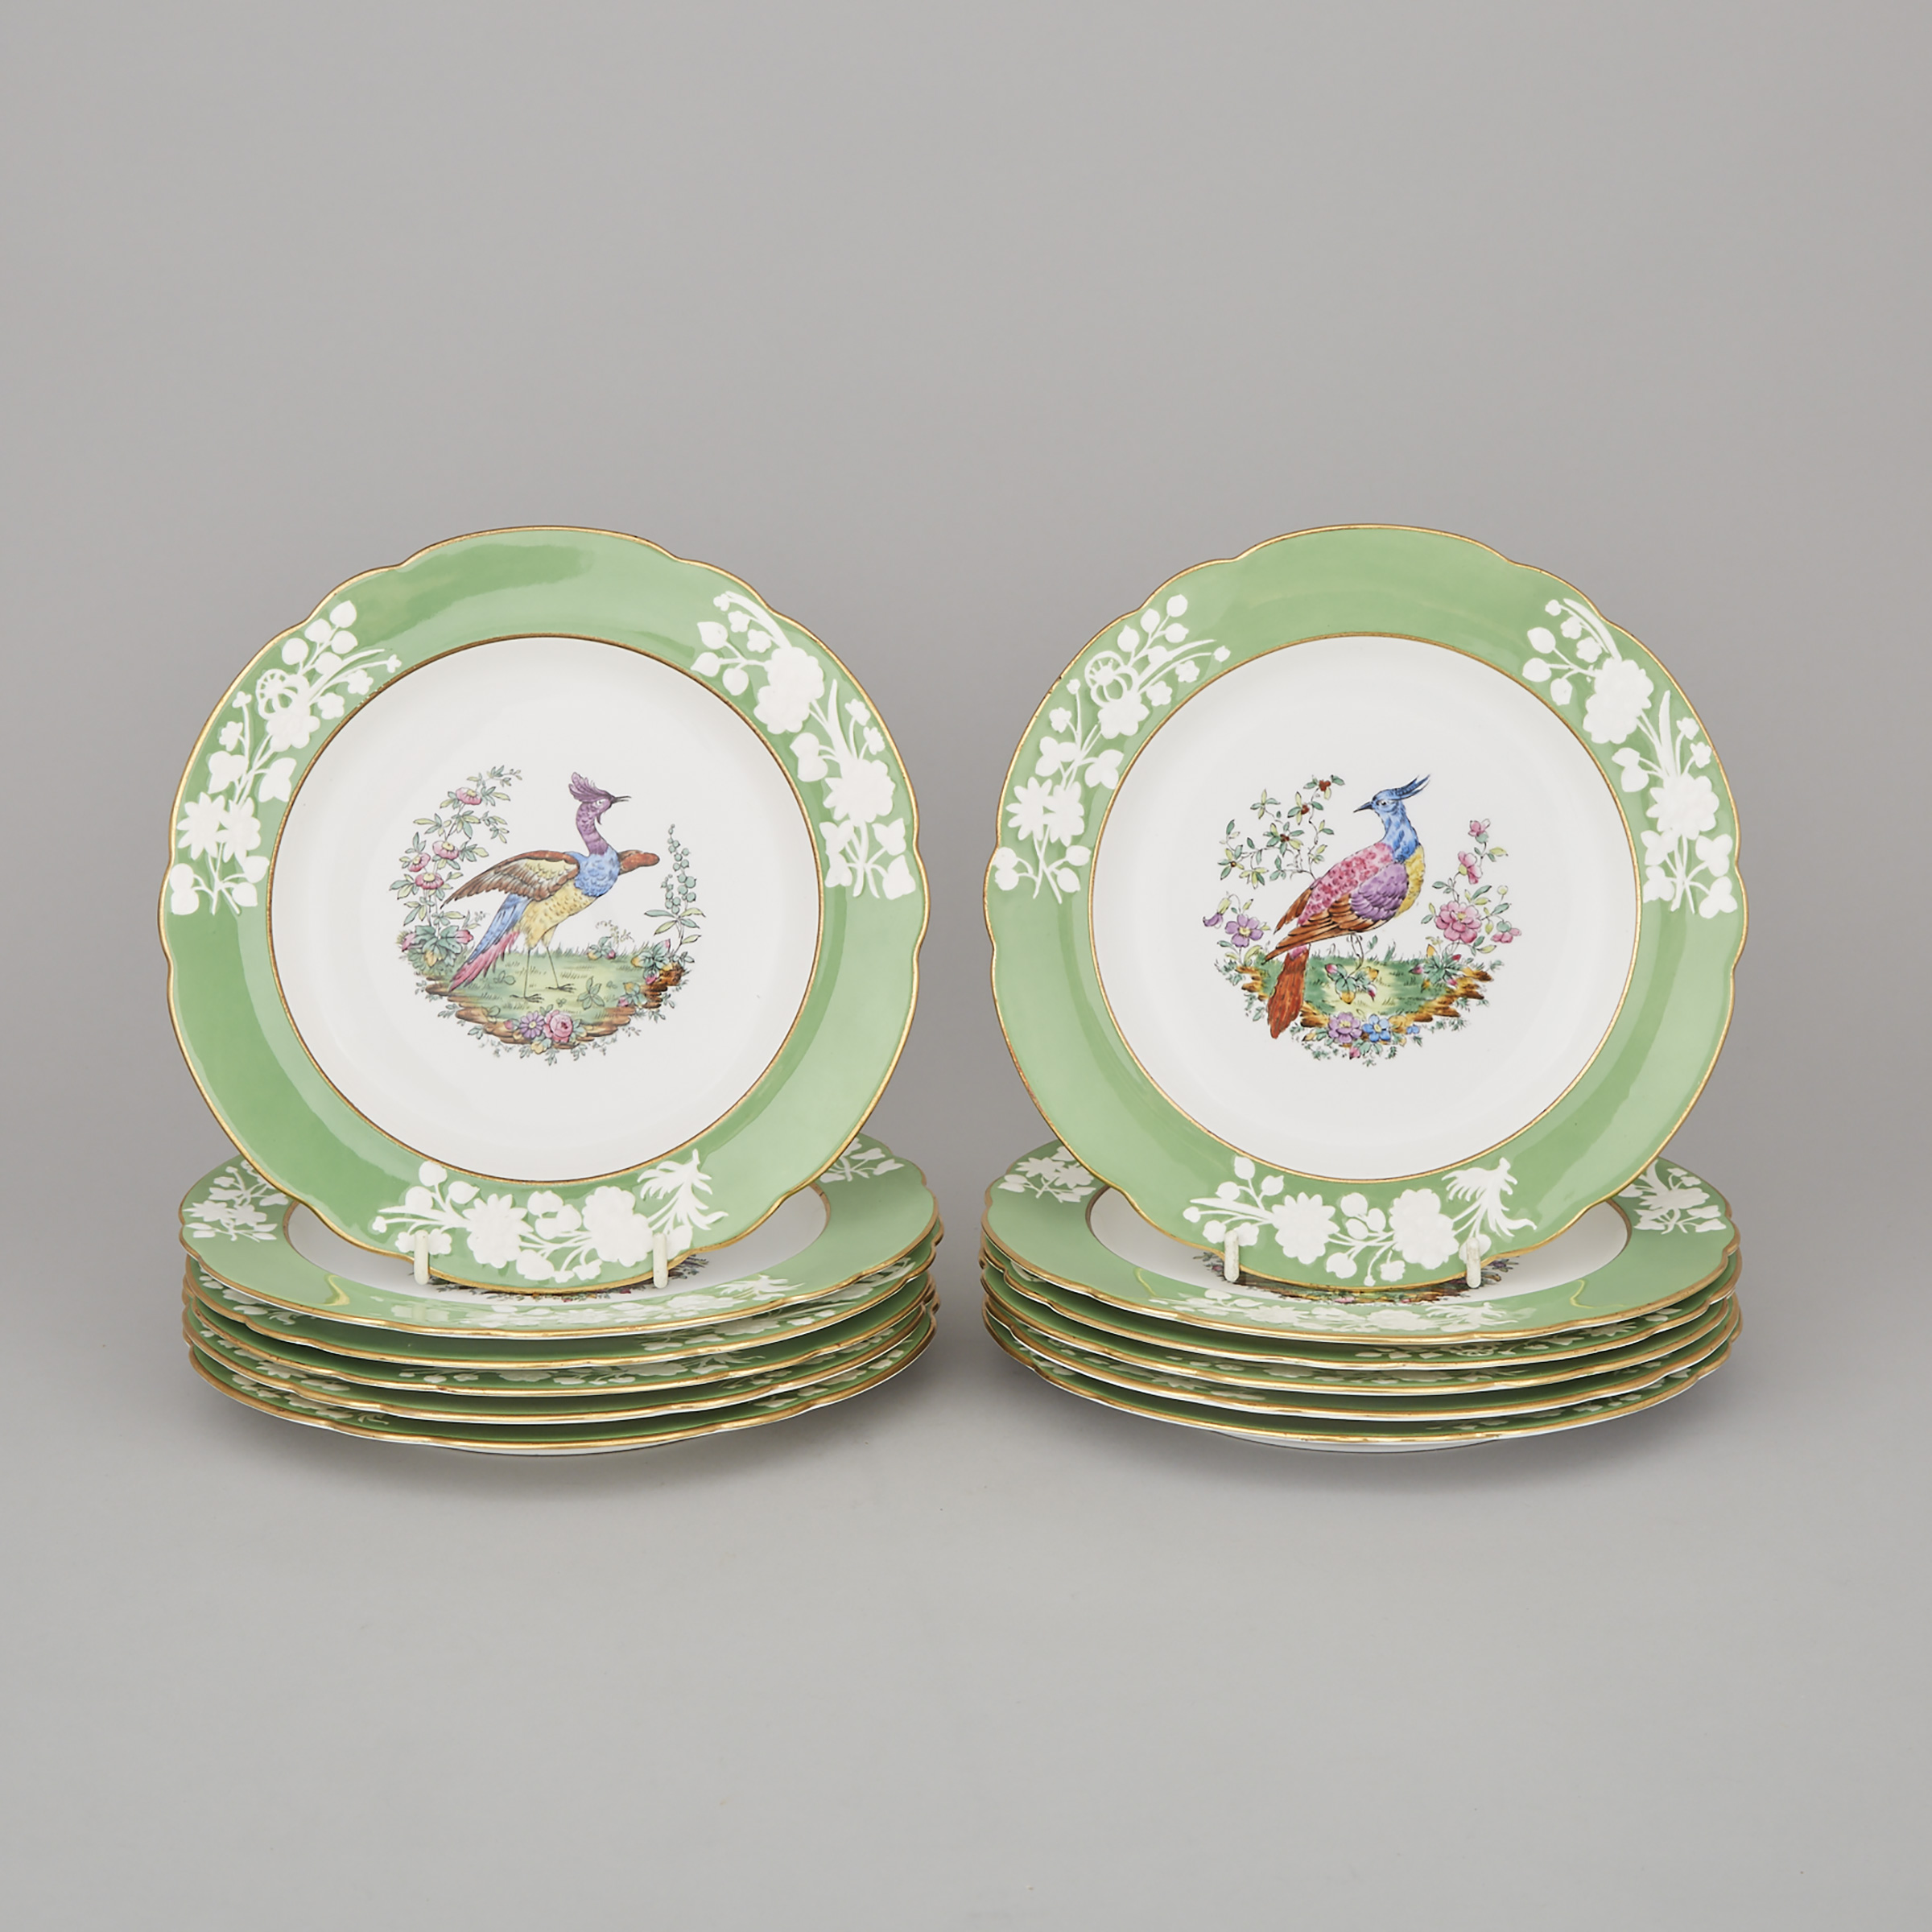 Twelve Copeland Spode Apple Green Banded 'Liverpool Birds' Plates, early 20th century